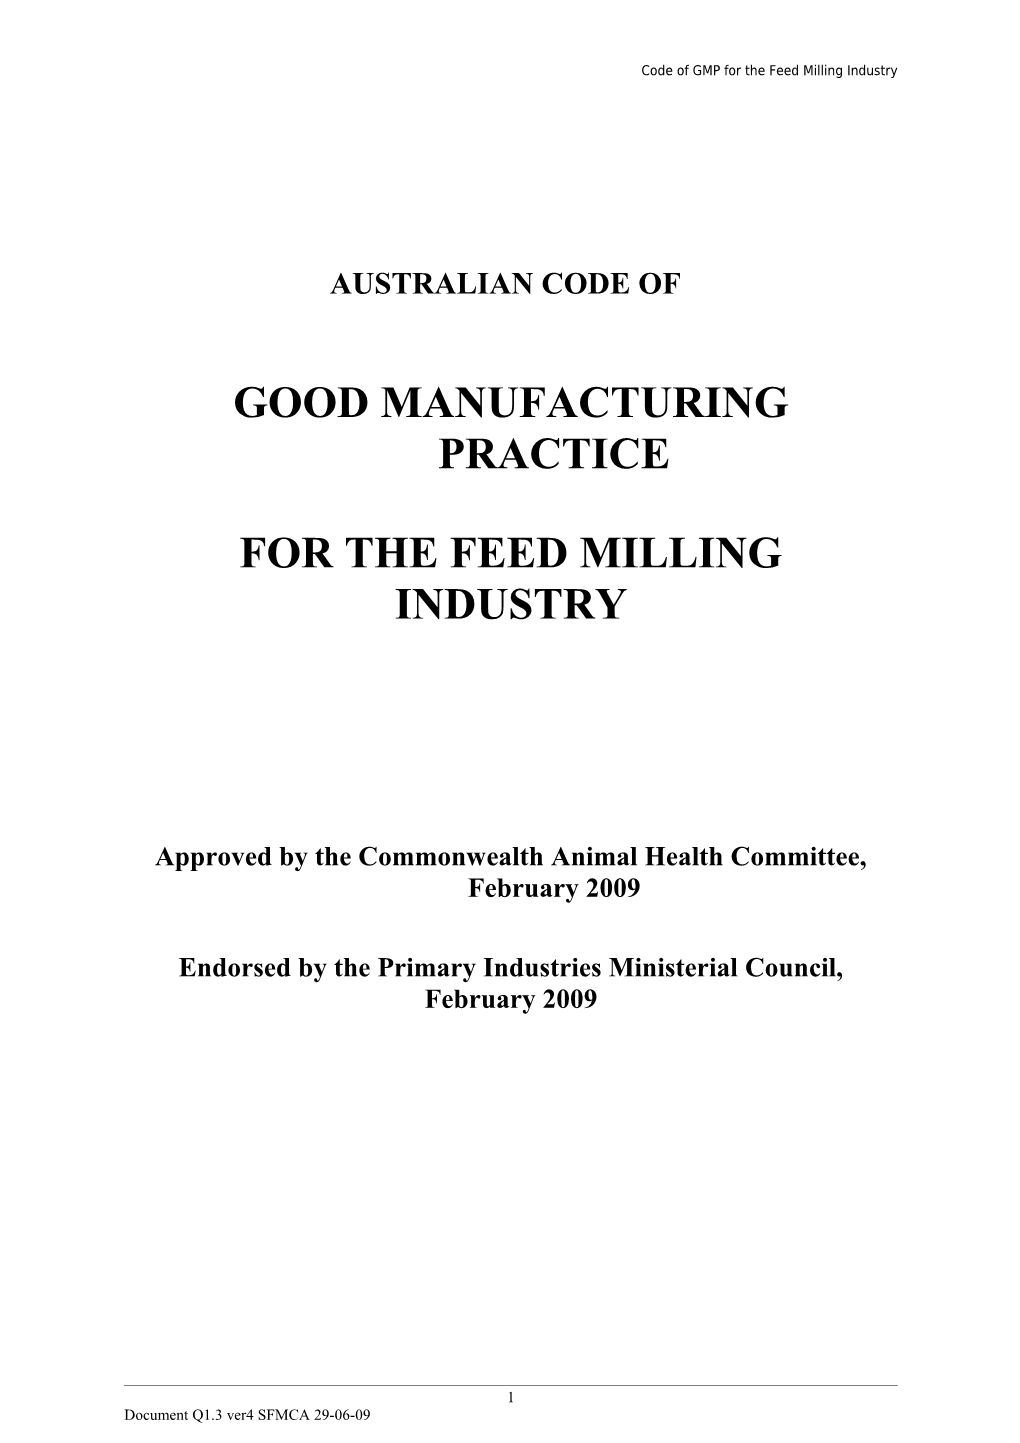 Code of Good Manufacturing Practice for the Feed Milling Industry